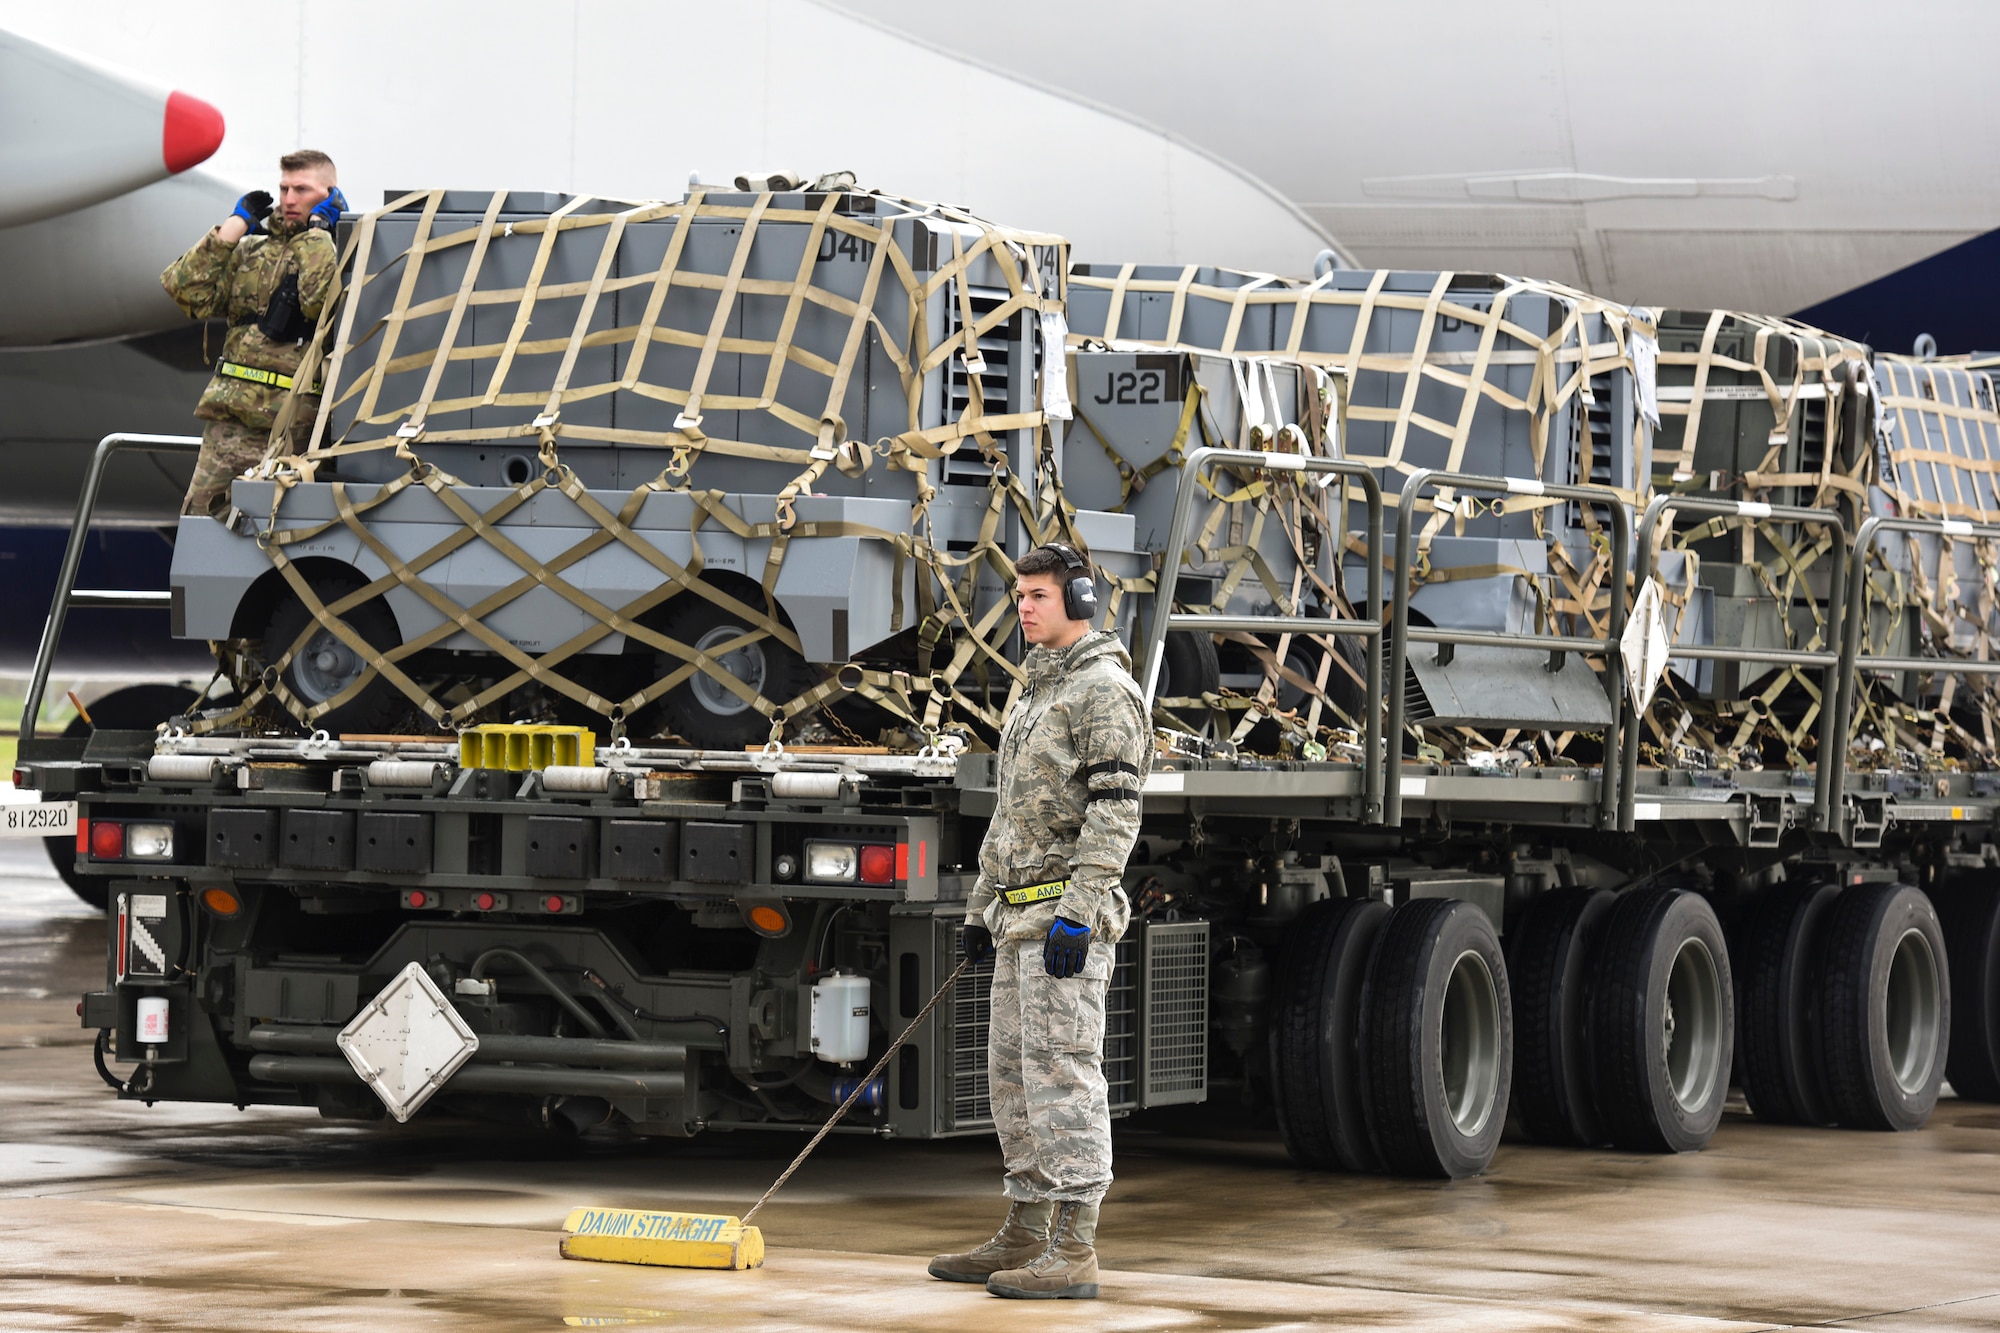 Staff Sgt. Daniel Lauritzen, 728th Air Mobility Squadron aircraft services supervisor, and Senior Airman Dane Johnson, 728th AMS aircraft services journeyman, direct a K-Loader into place March 3, 2019, at Incirlik Air Base, Turkey. Airmen in the 728th AMS use K-loaders to offload and download thousands of pounds of cargo weekly. (U.S. Air Force photo by Staff Sgt. Ceaira Tinsley)